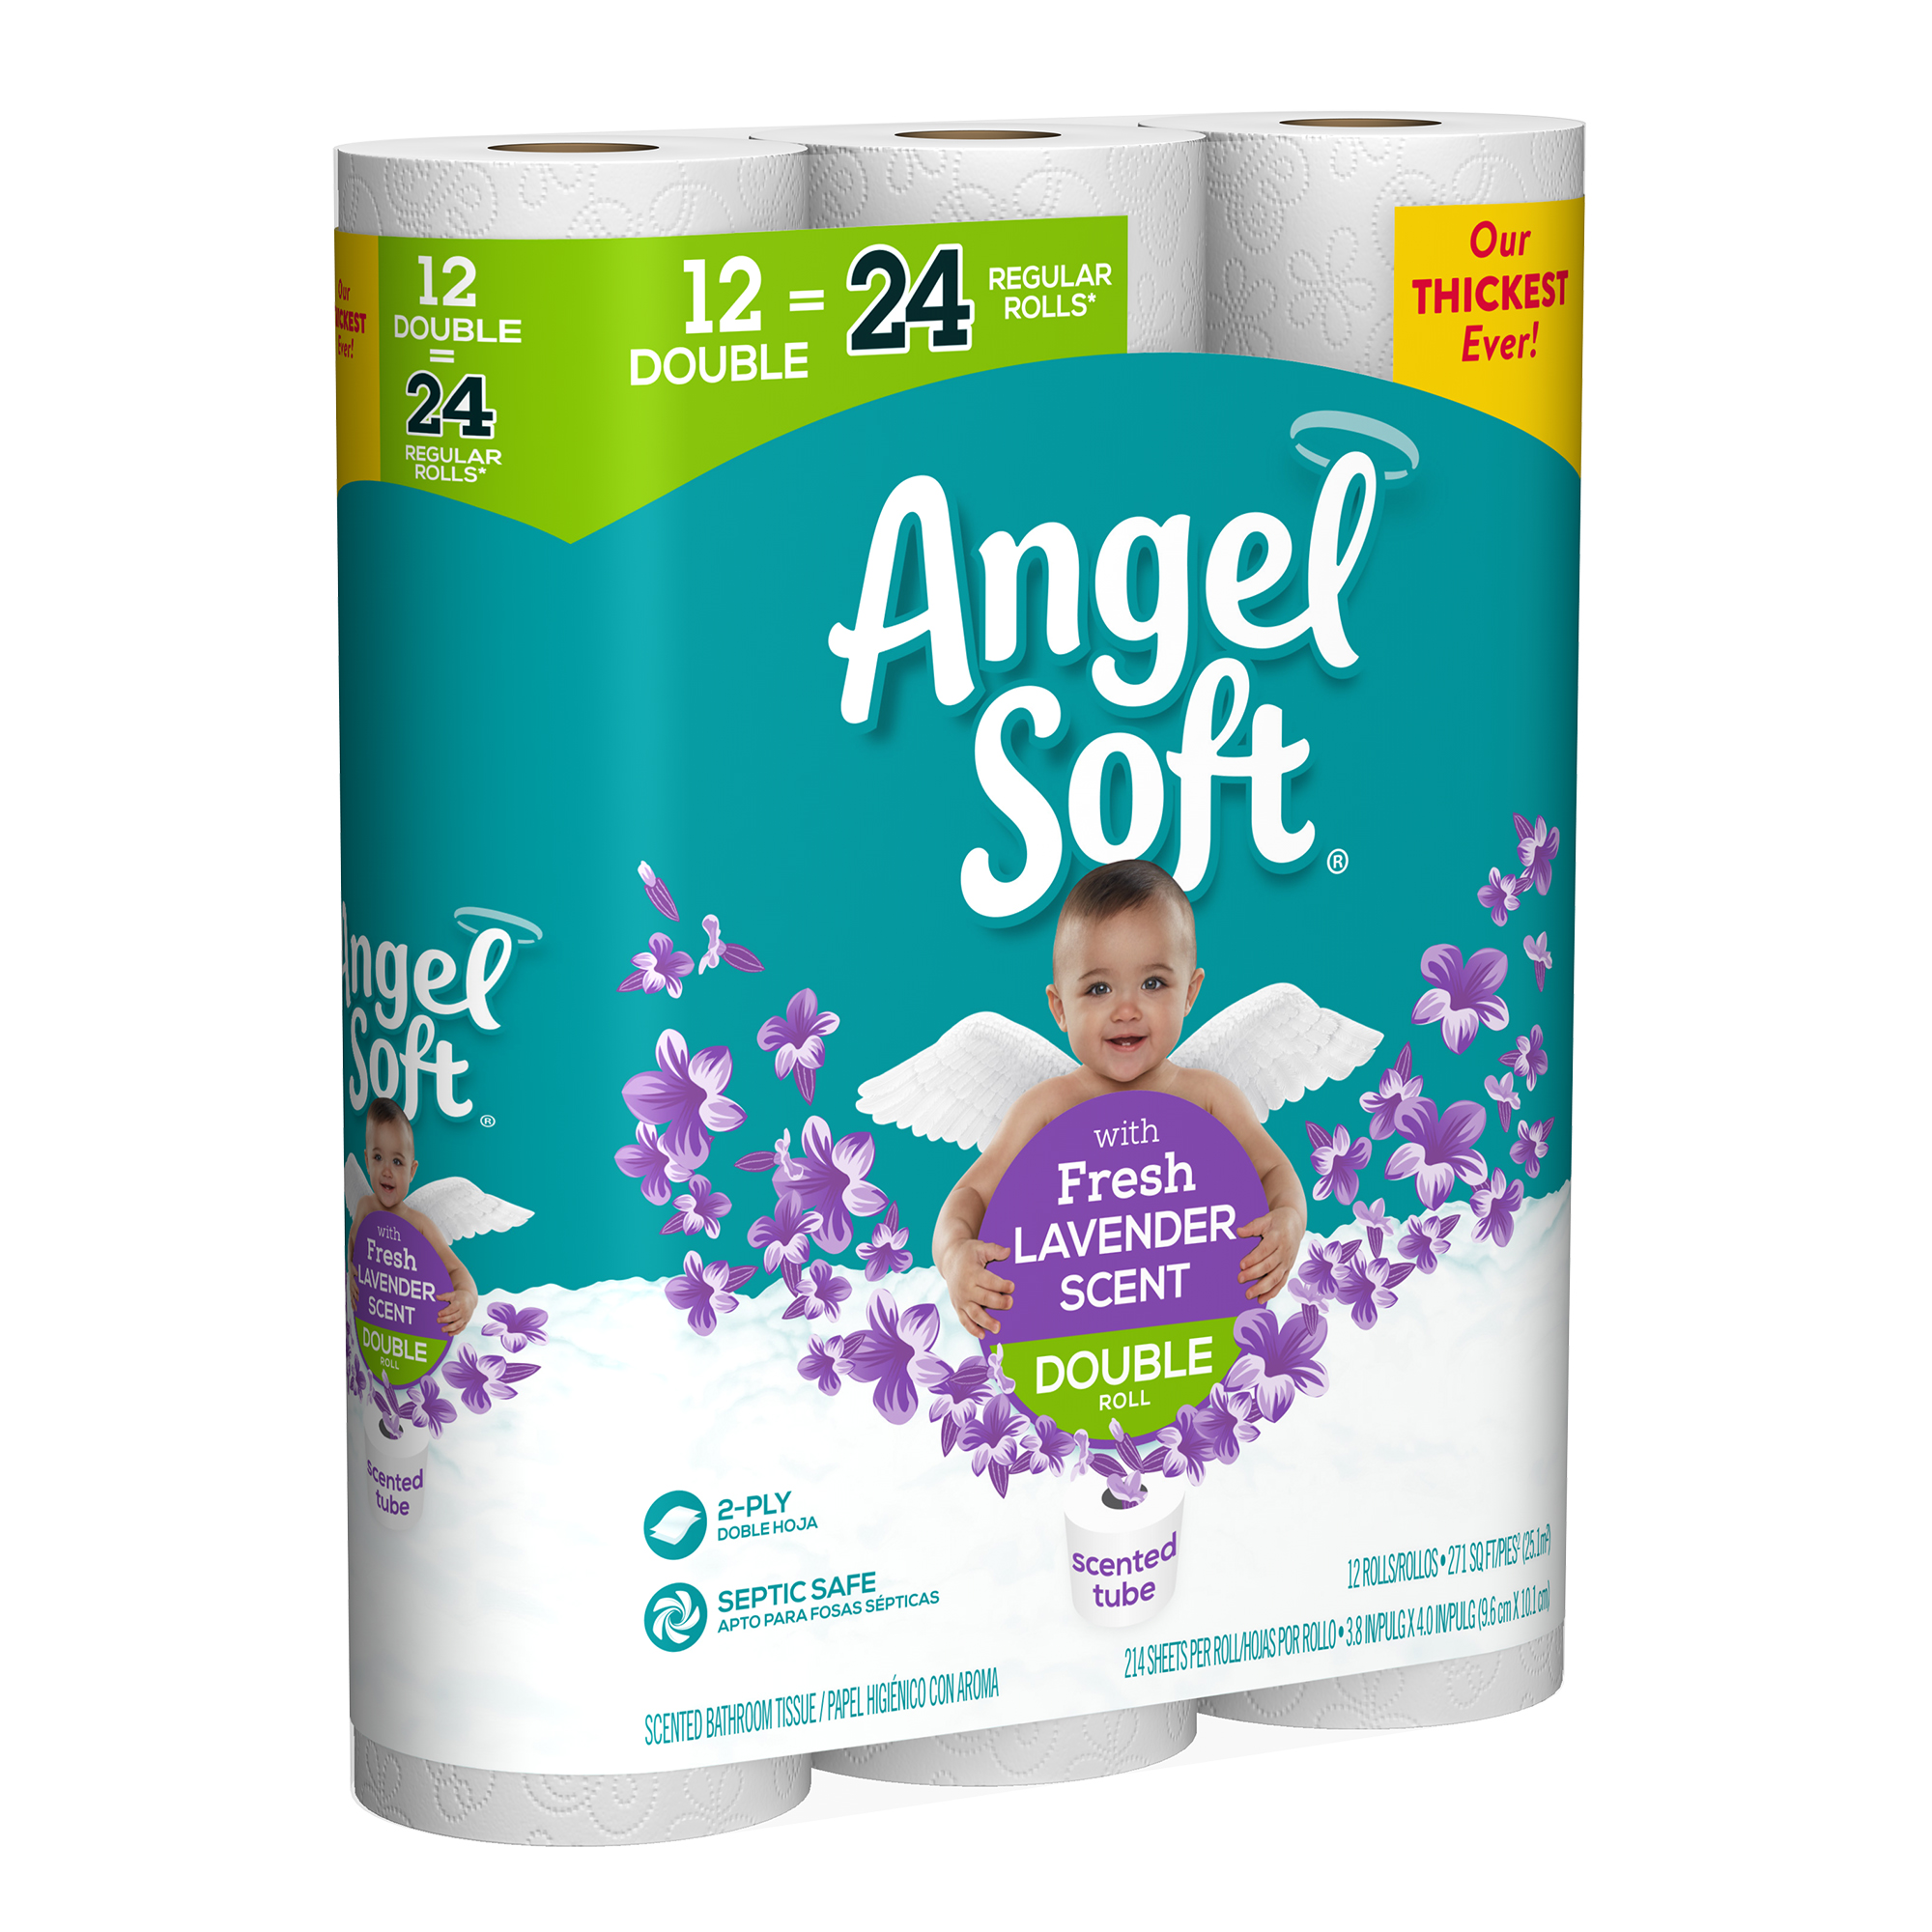 Angel Soft Toilet Paper with Fresh Lavender Scent, 12 Double Rolls - image 3 of 8